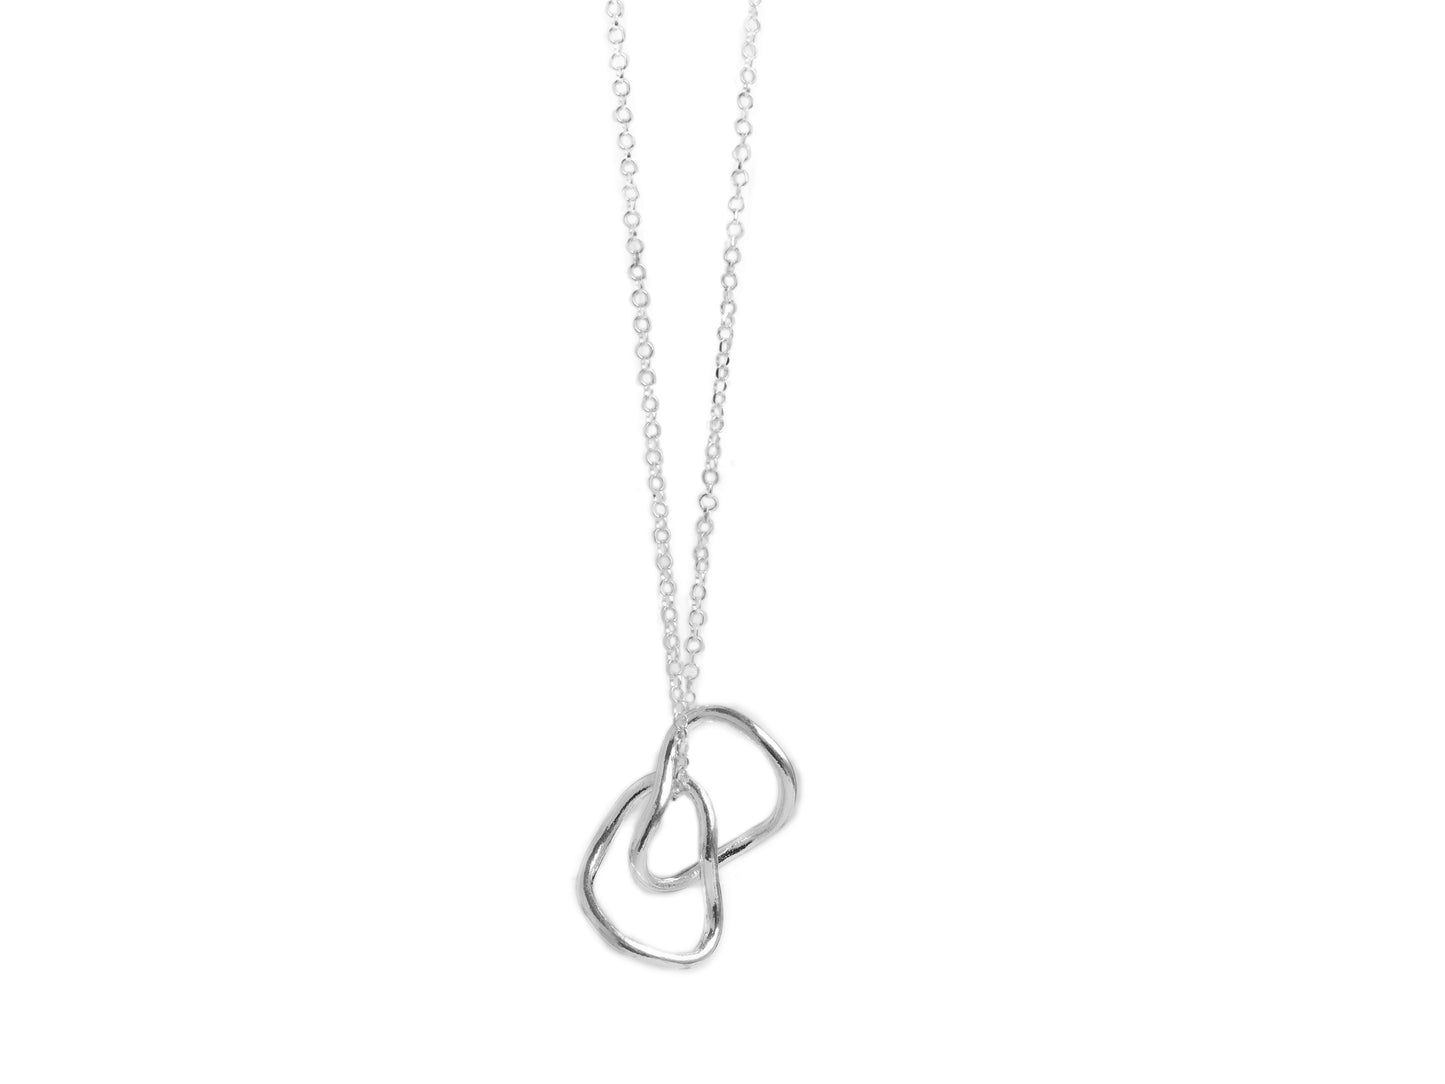 Simple interlinked necklace